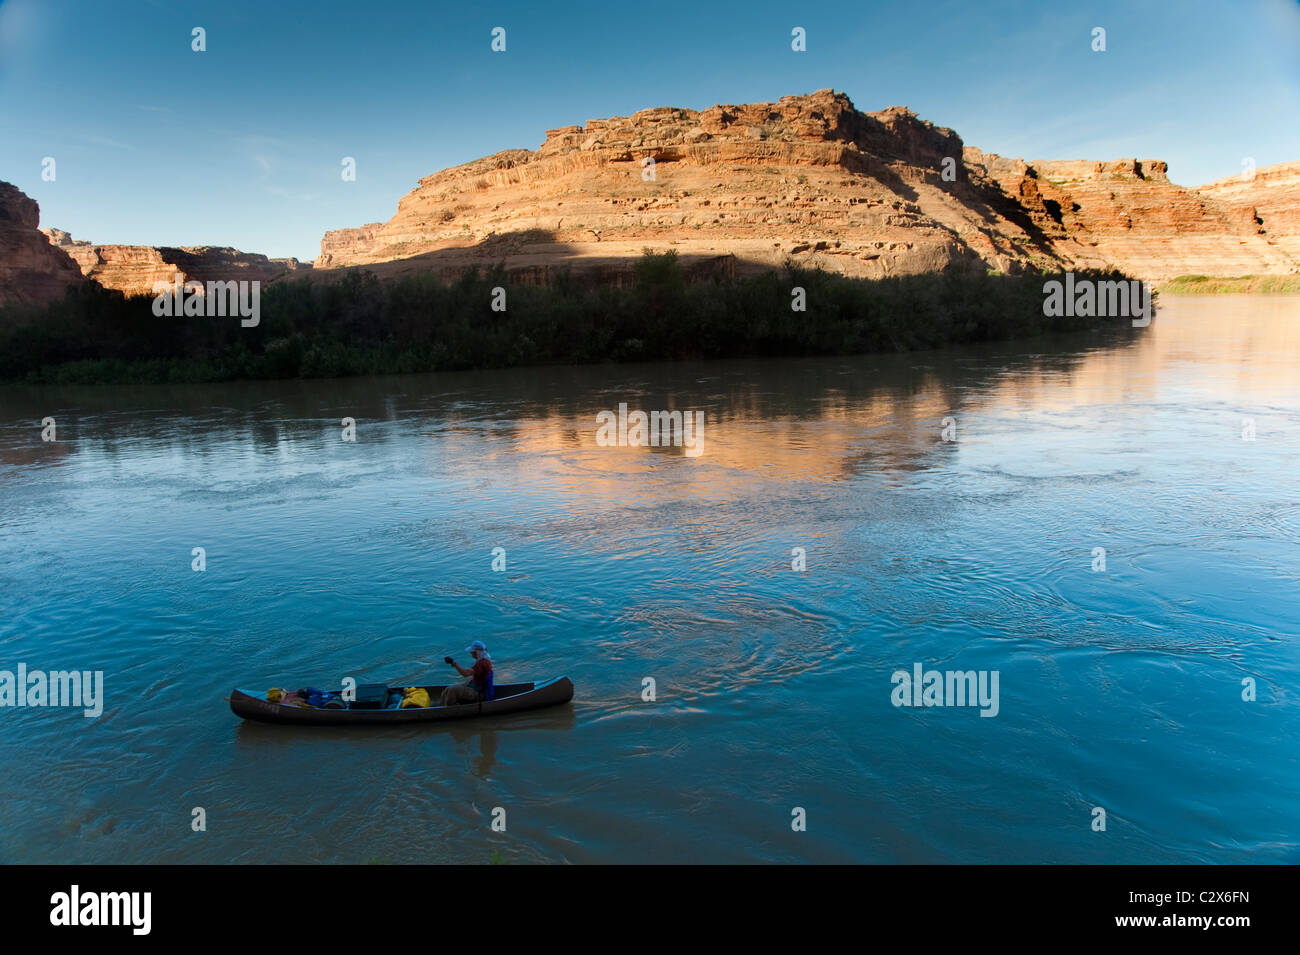 Man in a canoe on a desert river Stock Photo